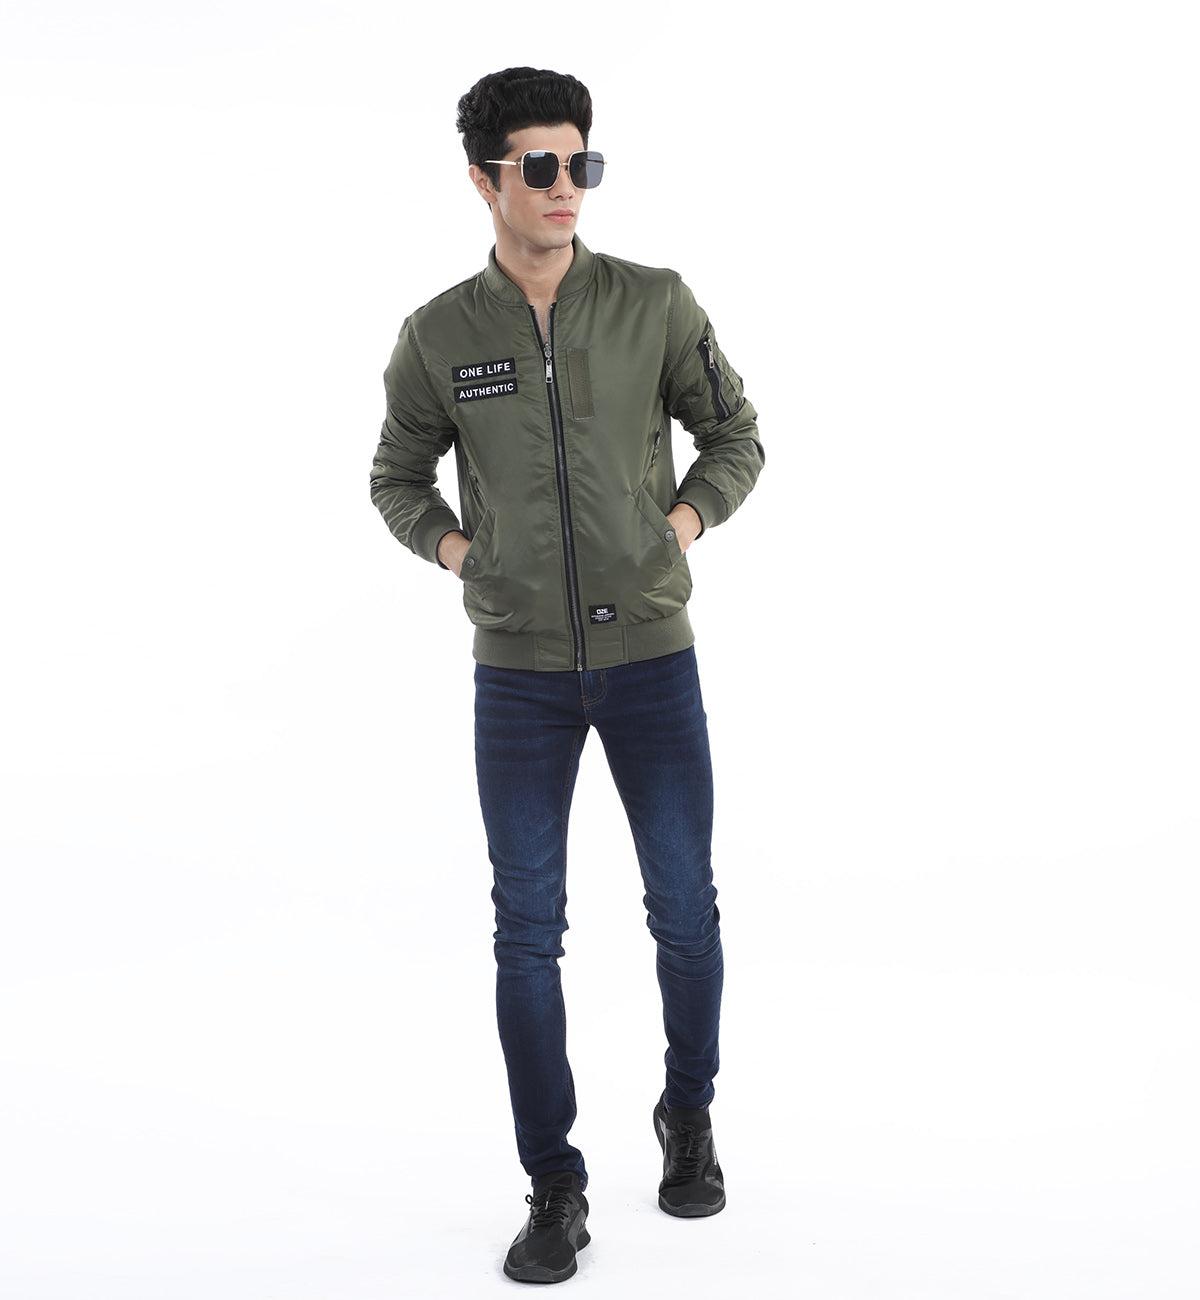 army jacket with jeans